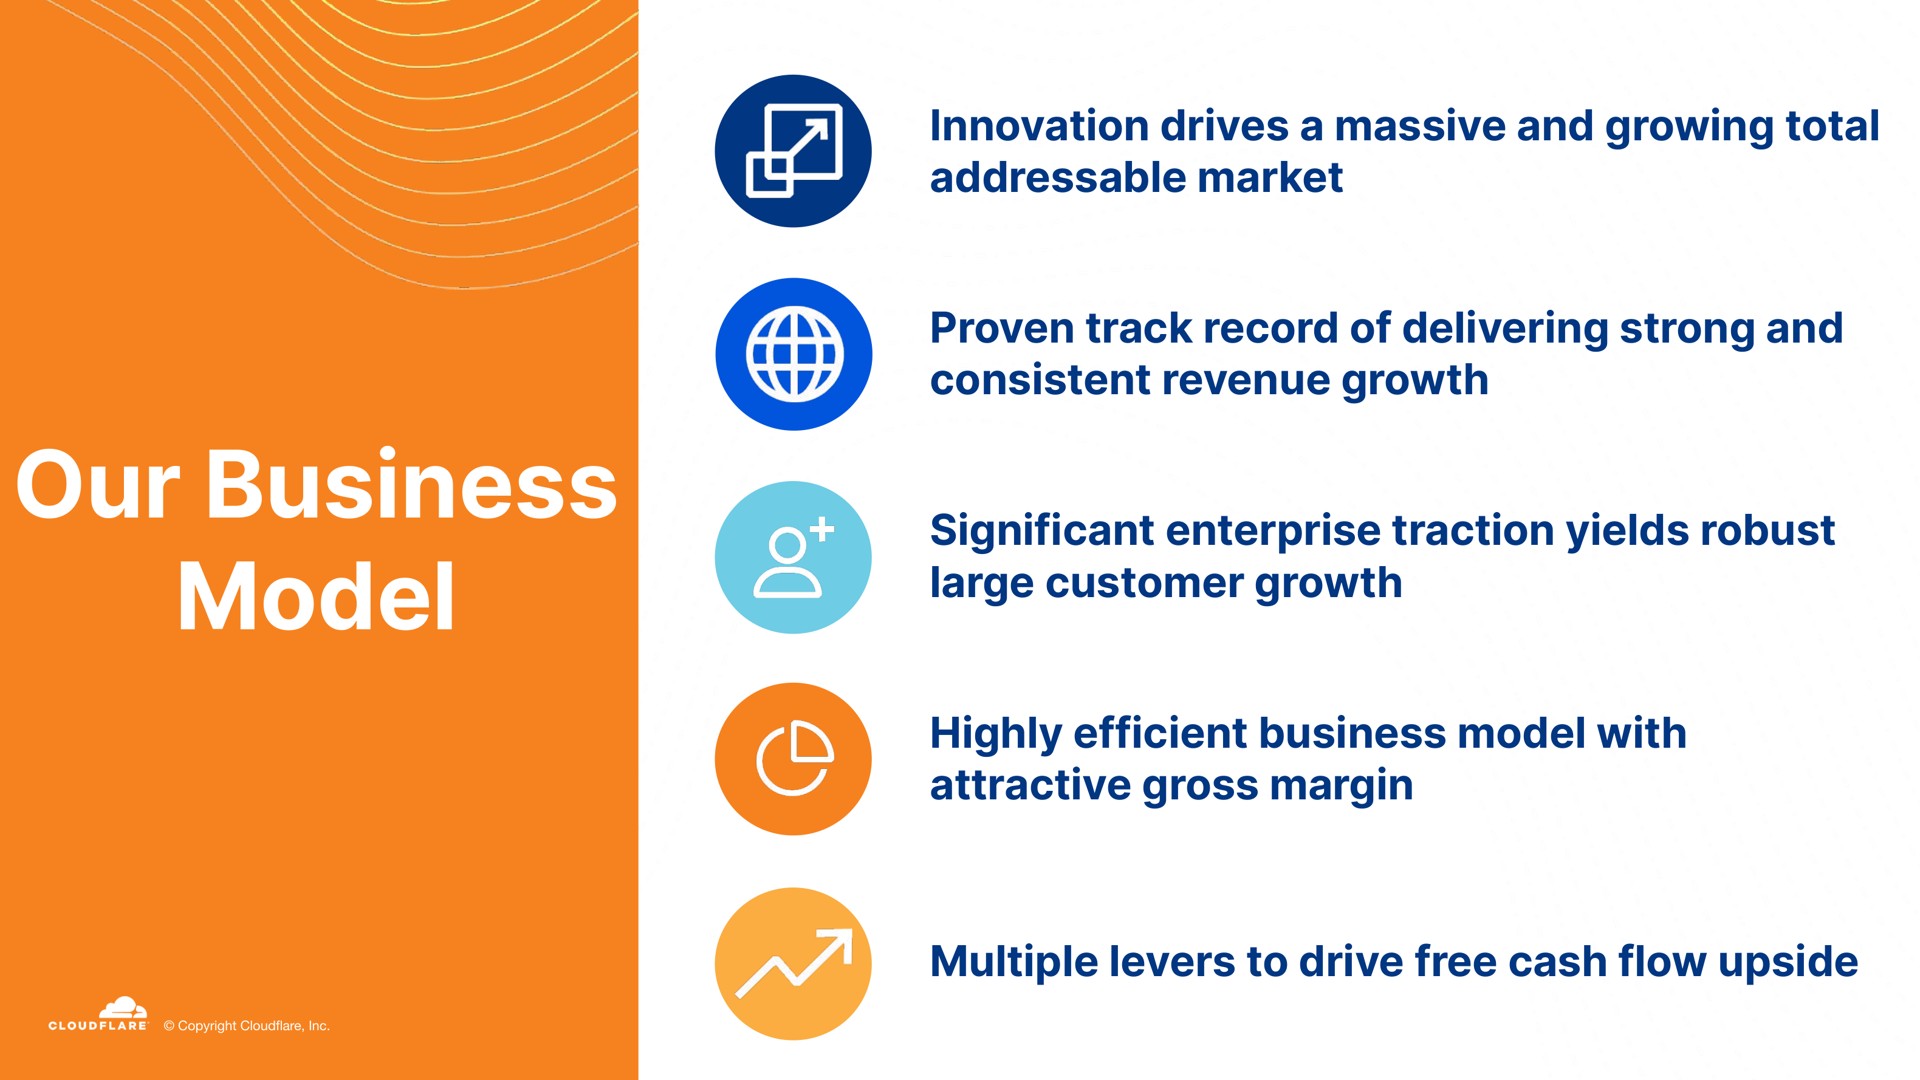 our business model why we win innovation drives a massive and growing total proven track record of delivering strong and consistent revenue growth significant enterprise traction yields robust highly efficient with attractive gross margin multiple levers to drive free cash flow upside | Cloudflare